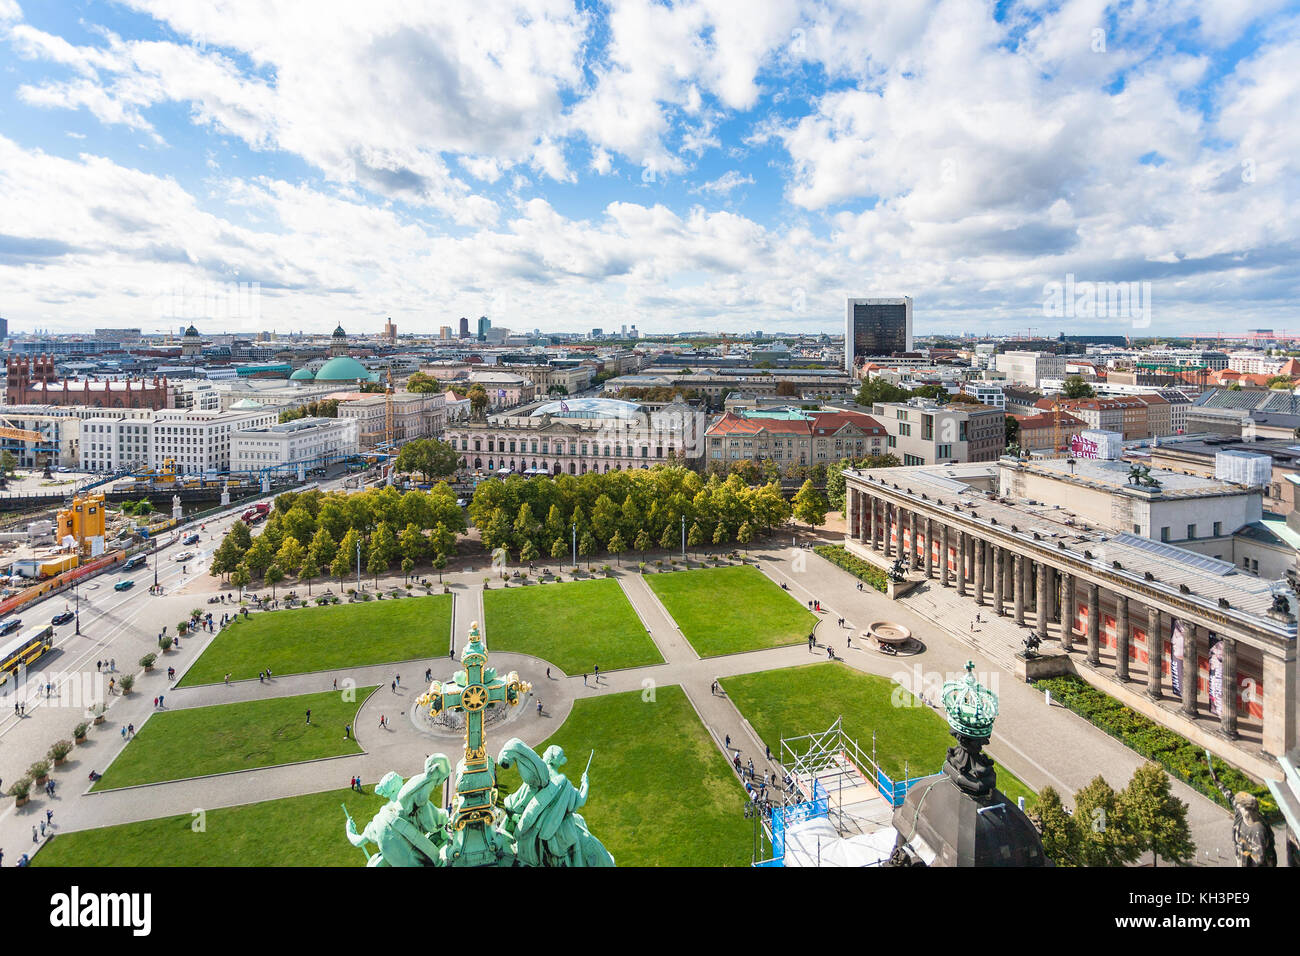 BERLIN, GERMANY - SEPTEMBER 13, 2017: above view of Lustgarten park and Altes Museum at Museum Island in Berlin city. Museumsinsel is complex of signi Stock Photo